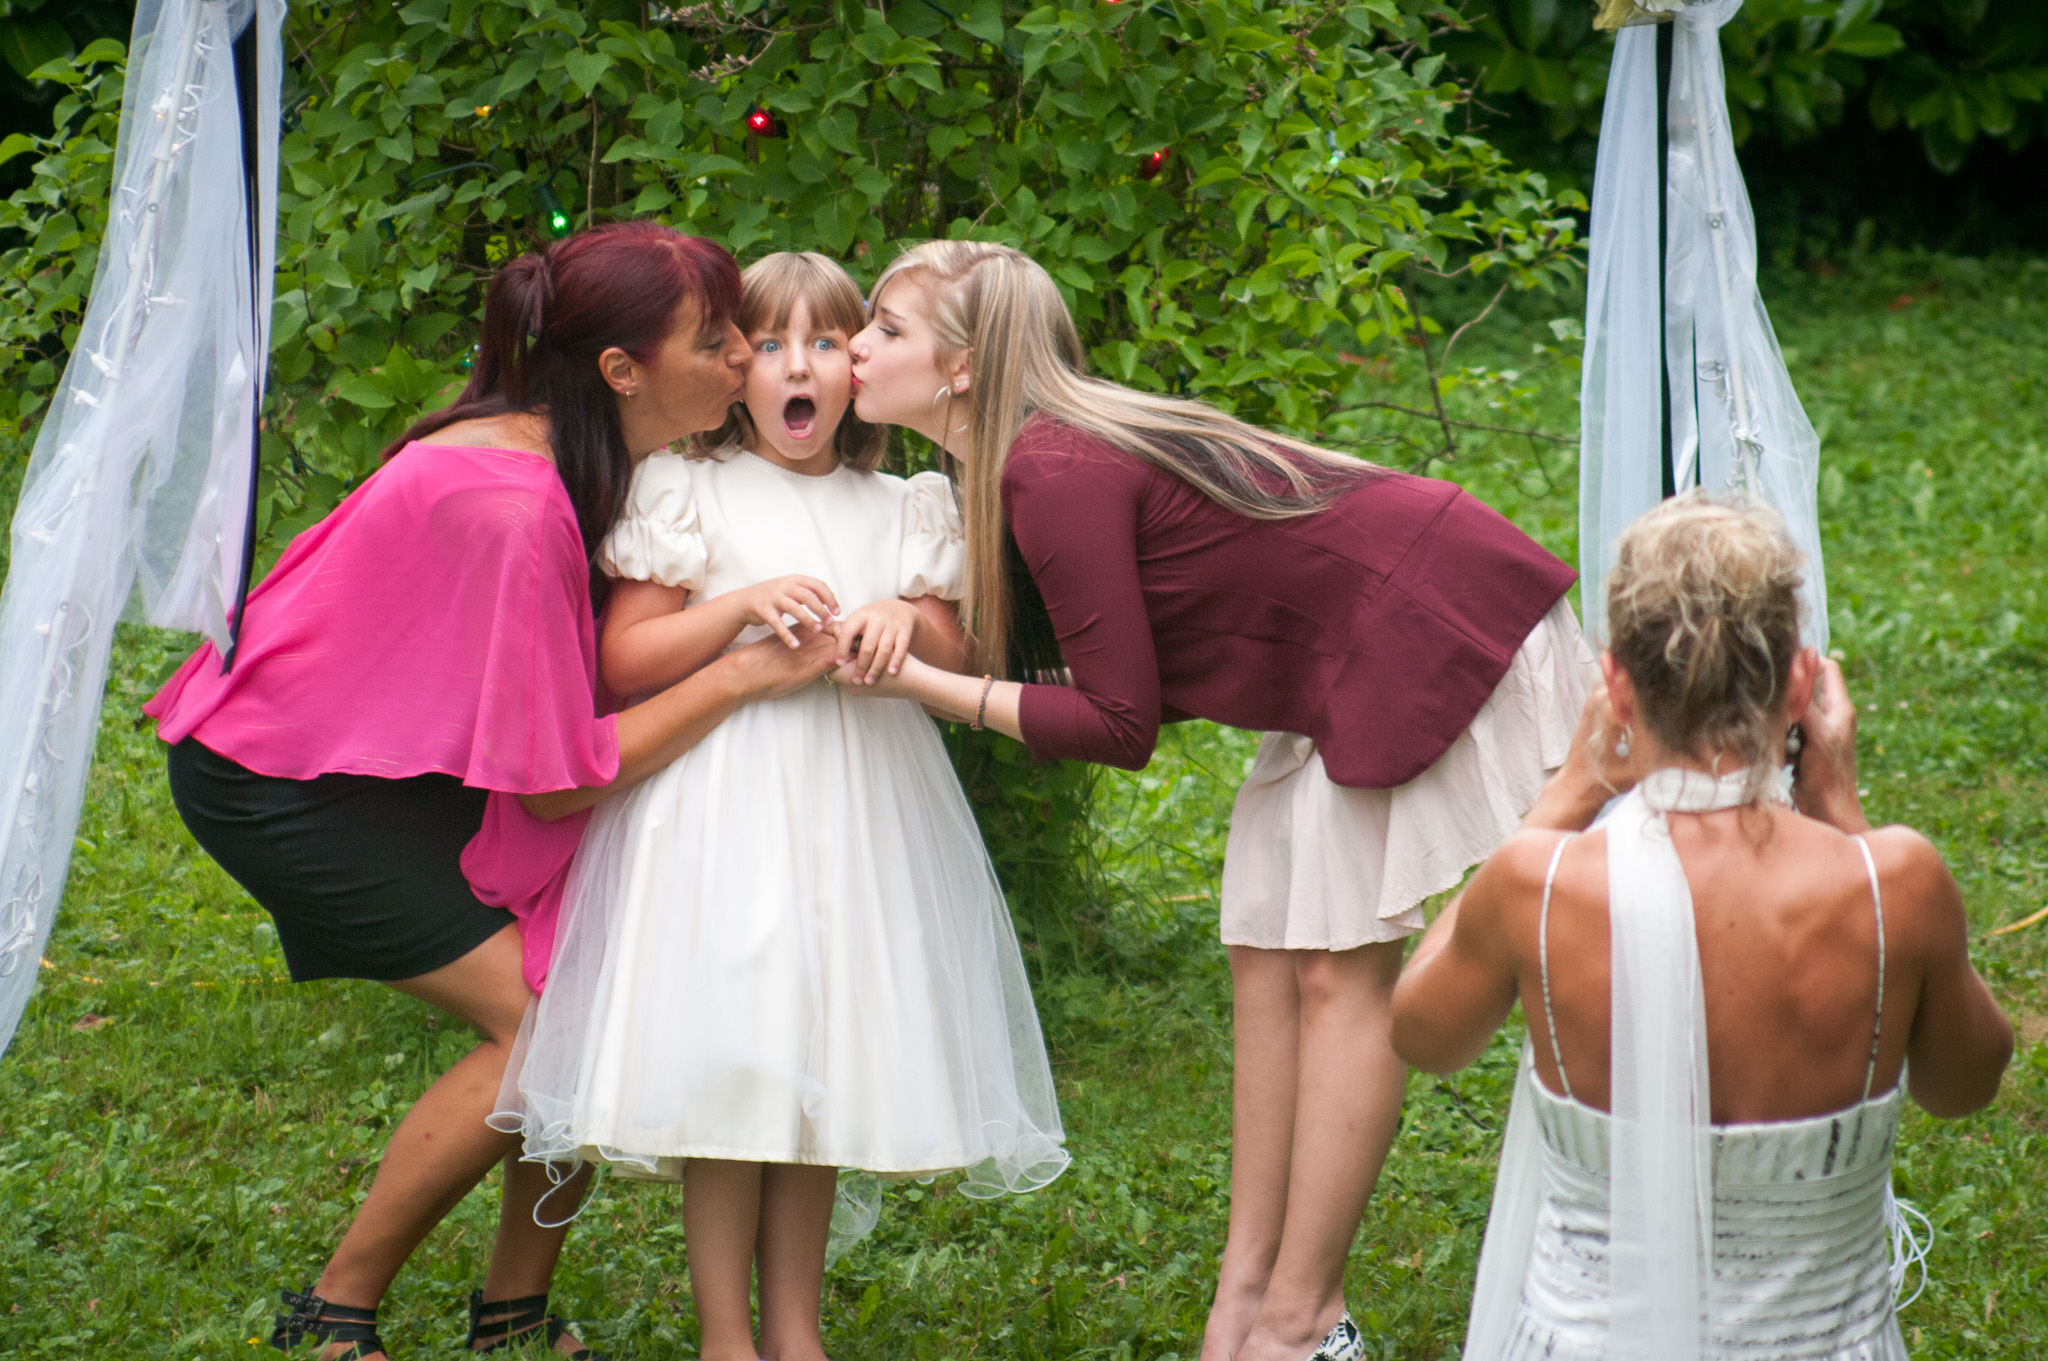 Another flower girl trying to steal the show :)